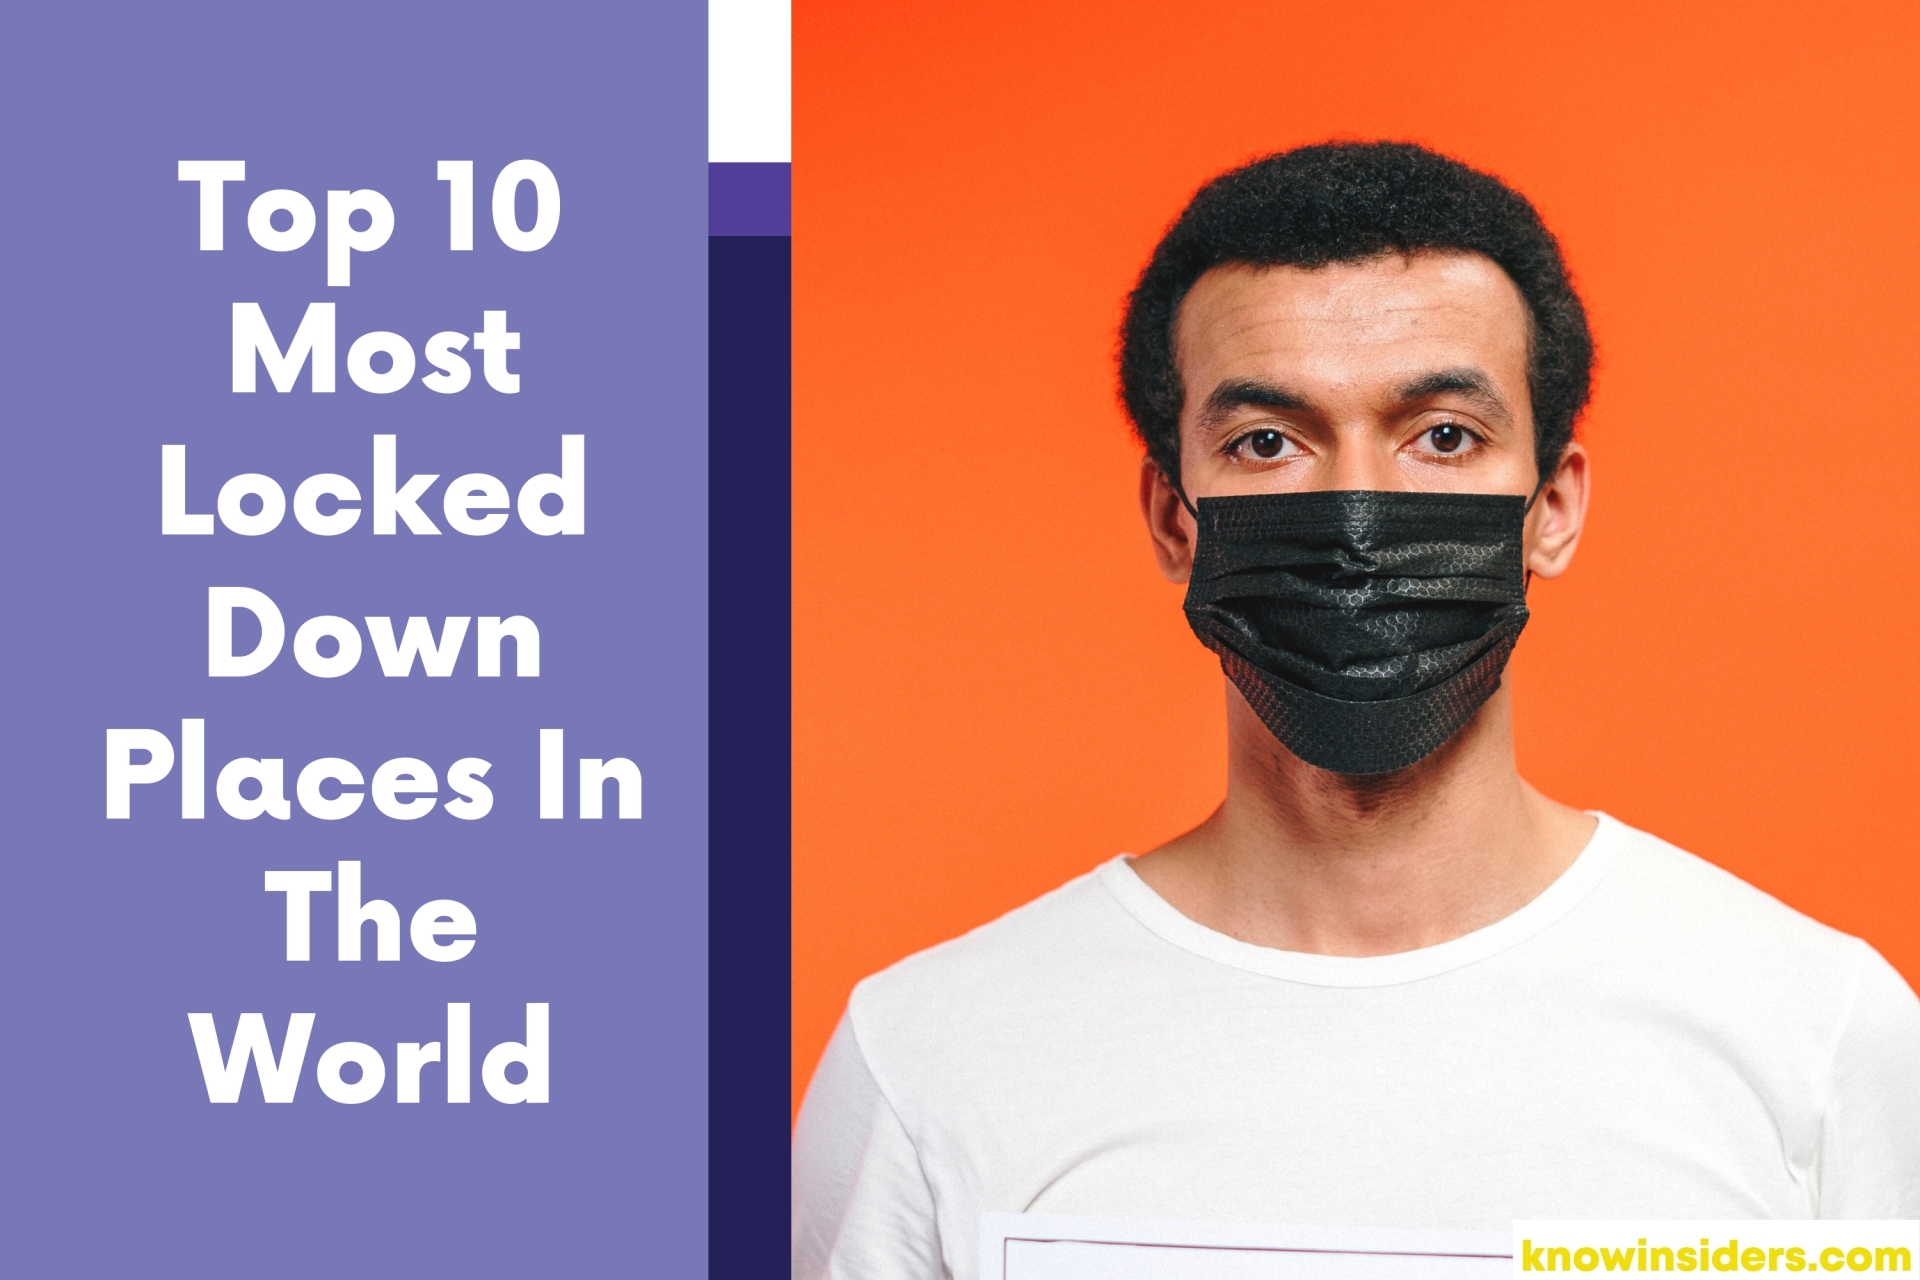 top 10 most locked down places in the world during covid 19 pandemic